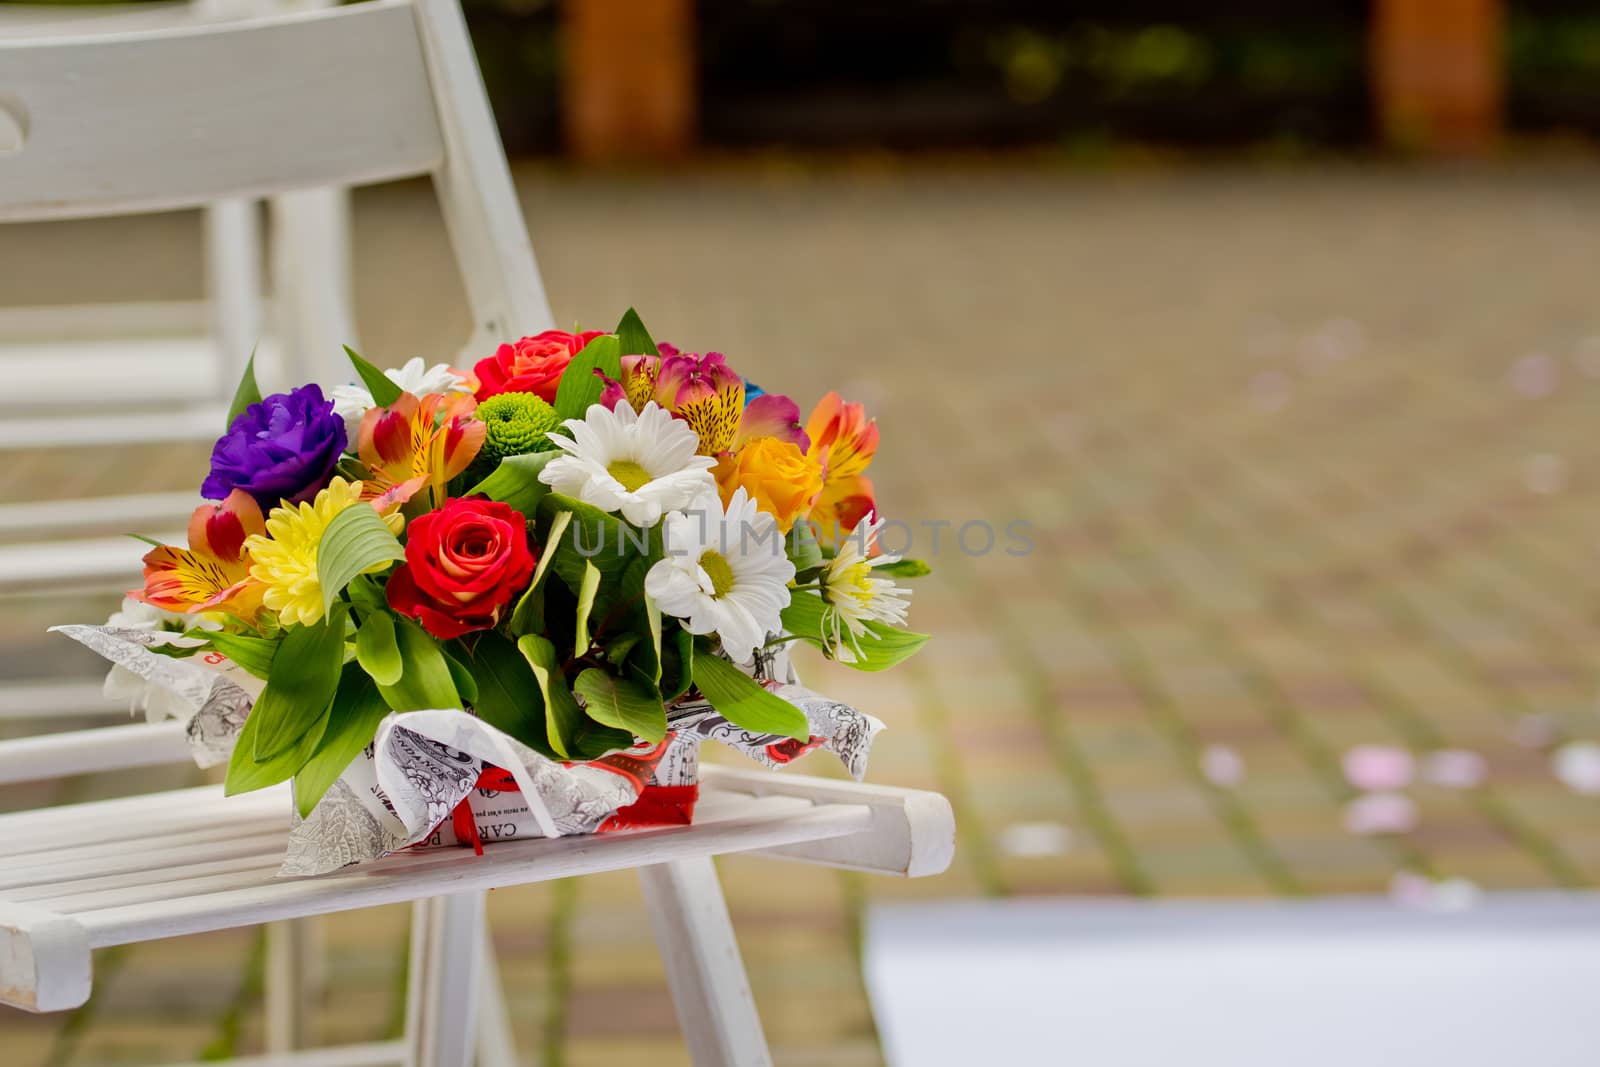 A beautiful gift bouquet in a wooden vase on a wooden bench. Wedding decorations.